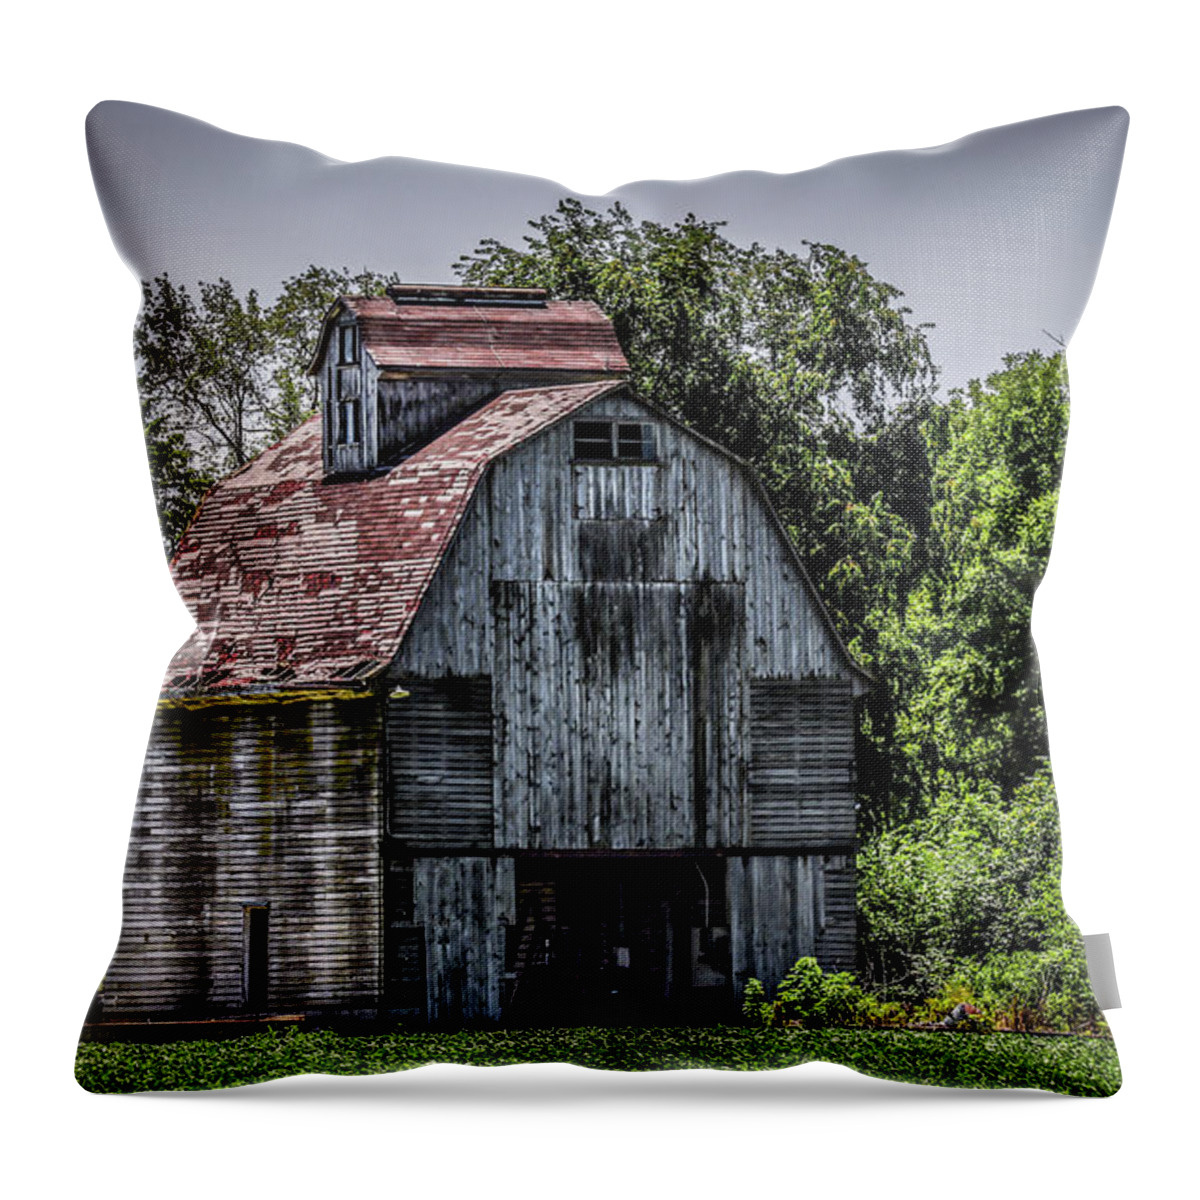 Barn Throw Pillow featuring the photograph Tall Barn by Ray Congrove